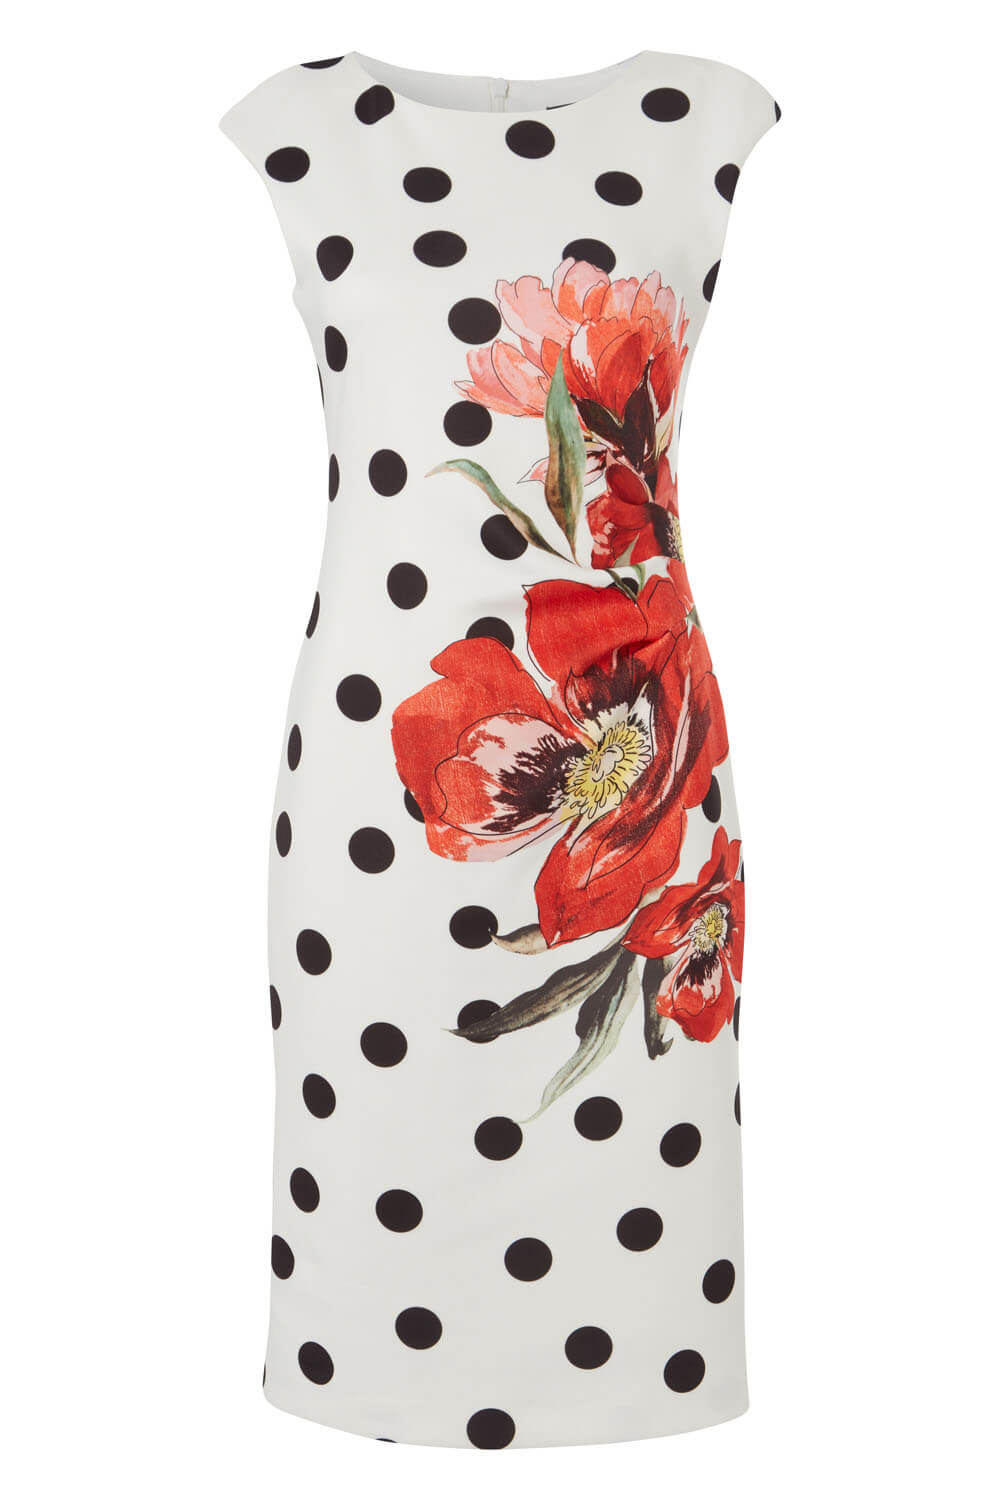 Red Spot Floral Print Premium Stretch Dress, Image 5 of 5